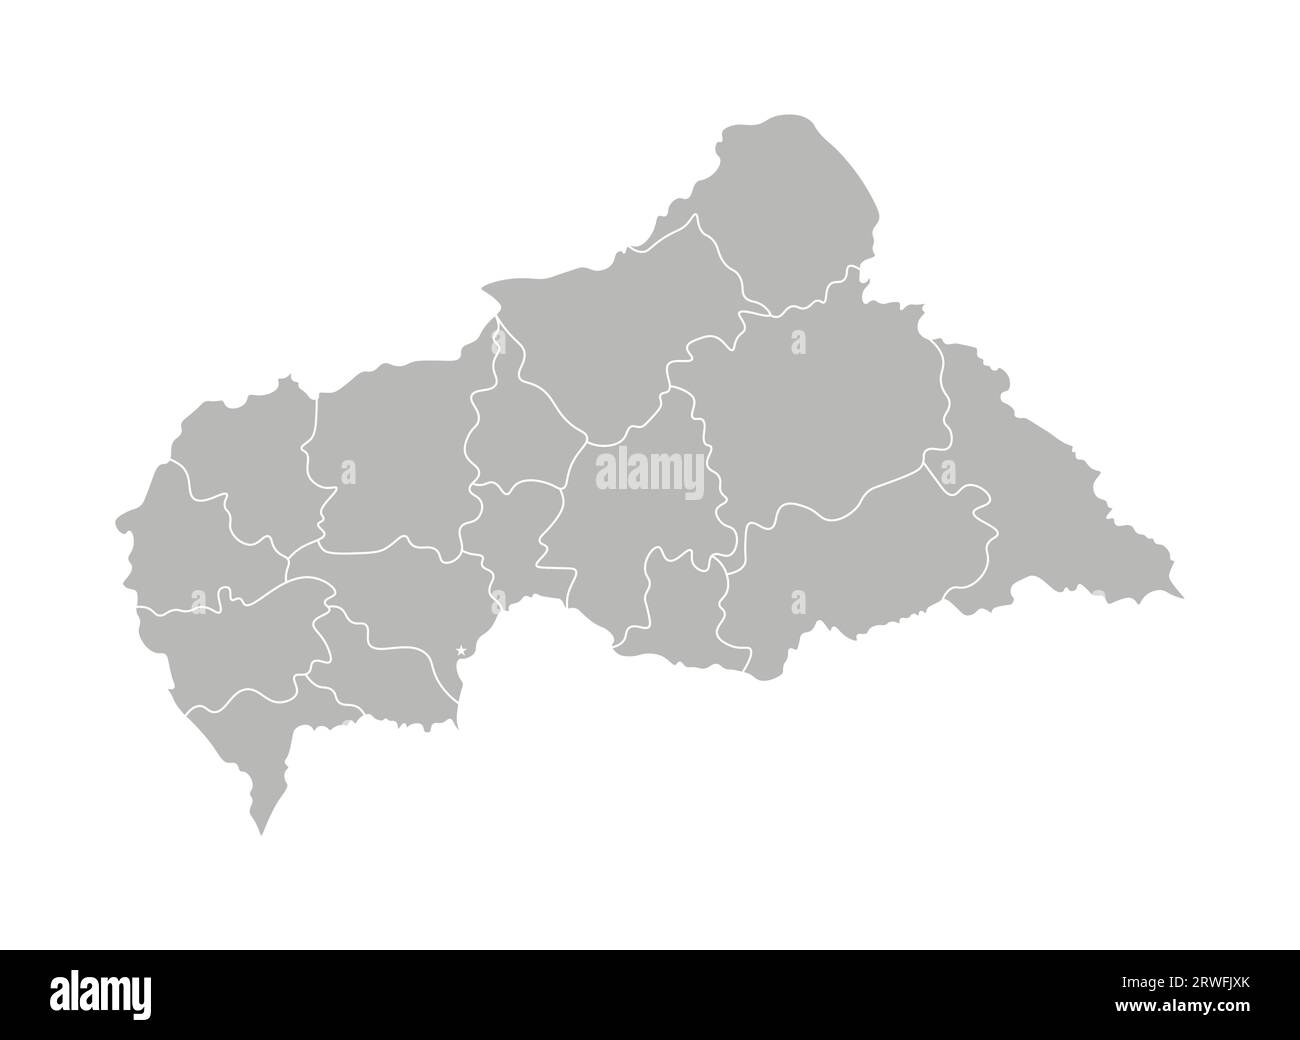 Vector isolated illustration of simplified administrative map of Central African Republic (CAR). Borders of the provinces (regions). Grey silhouettes. Stock Vector